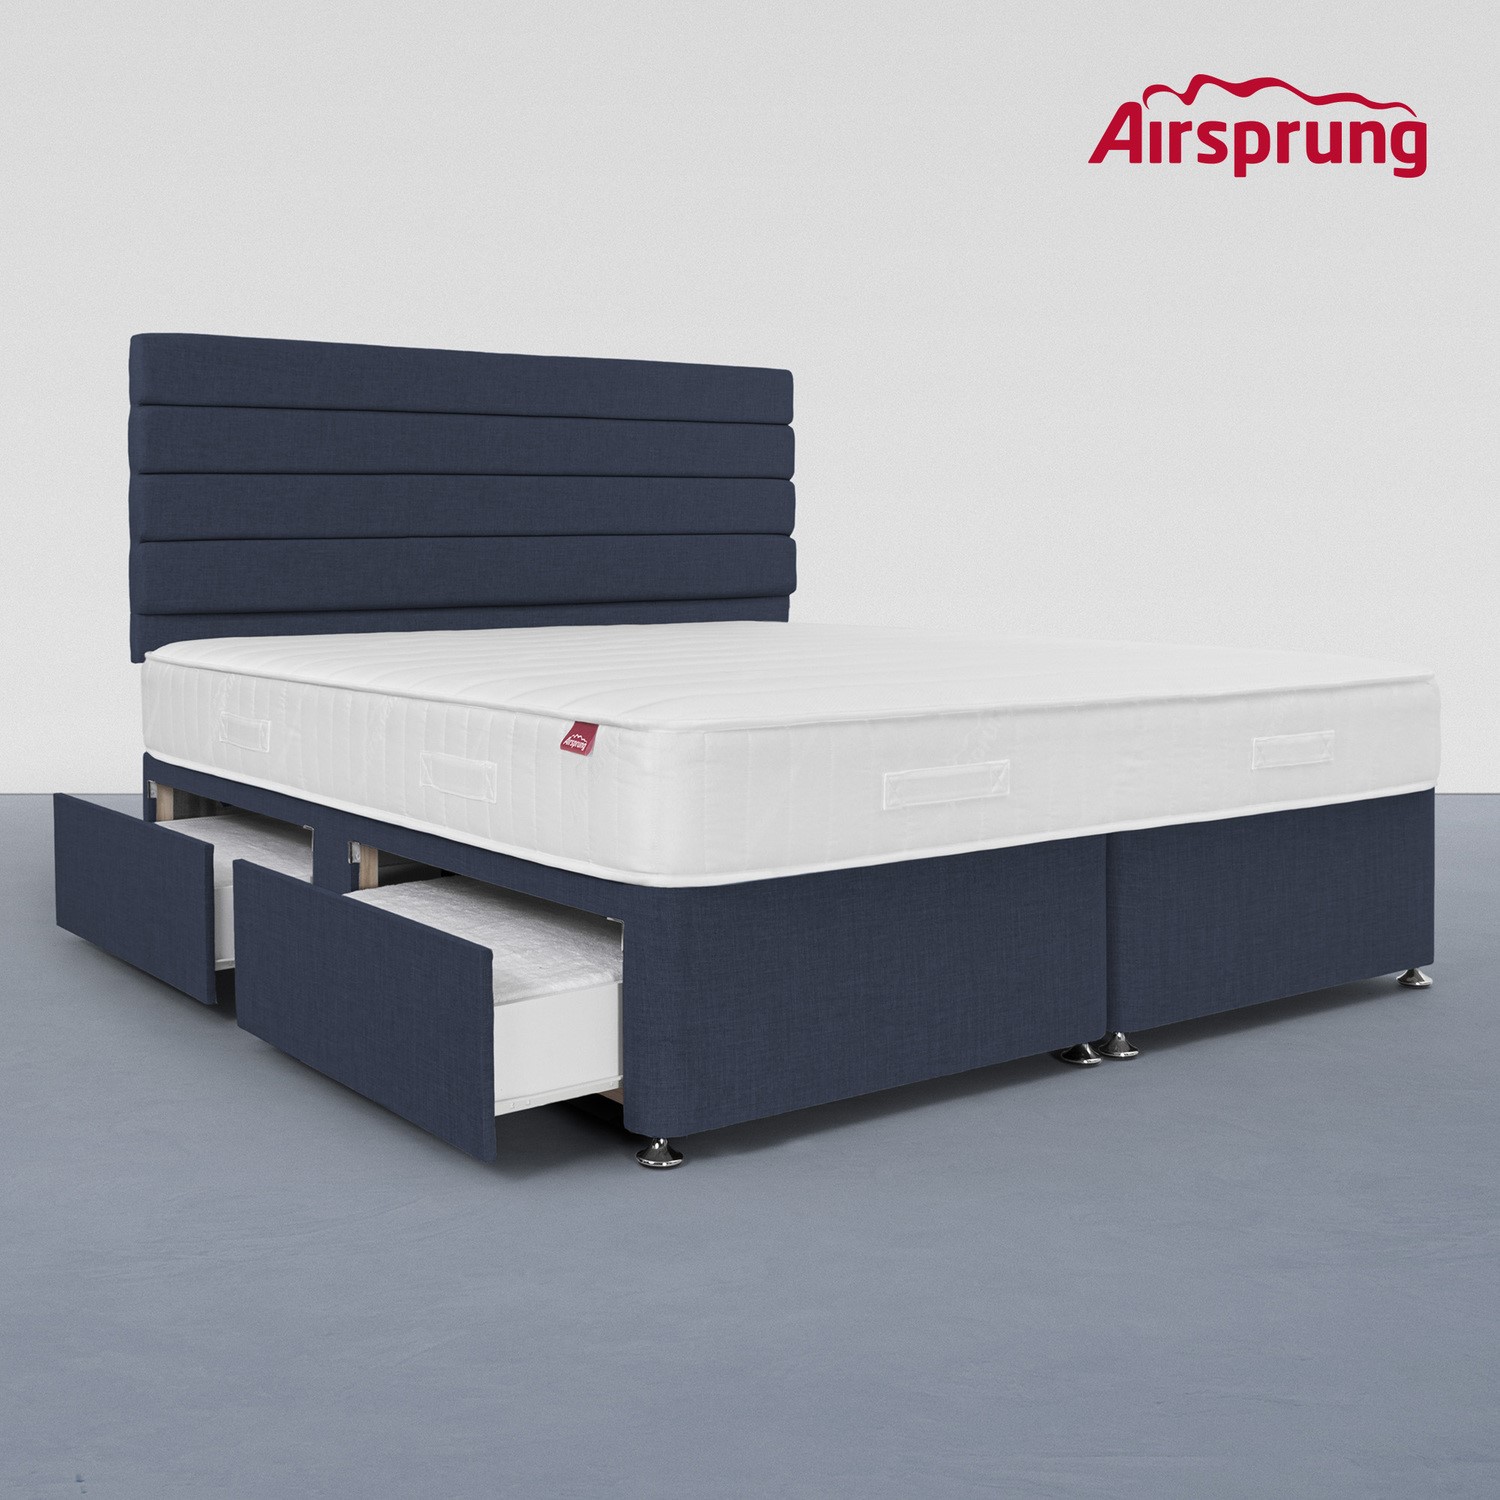 Read more about Airsprung super king 4 drawer divan bed with comfort mattress midnight blue